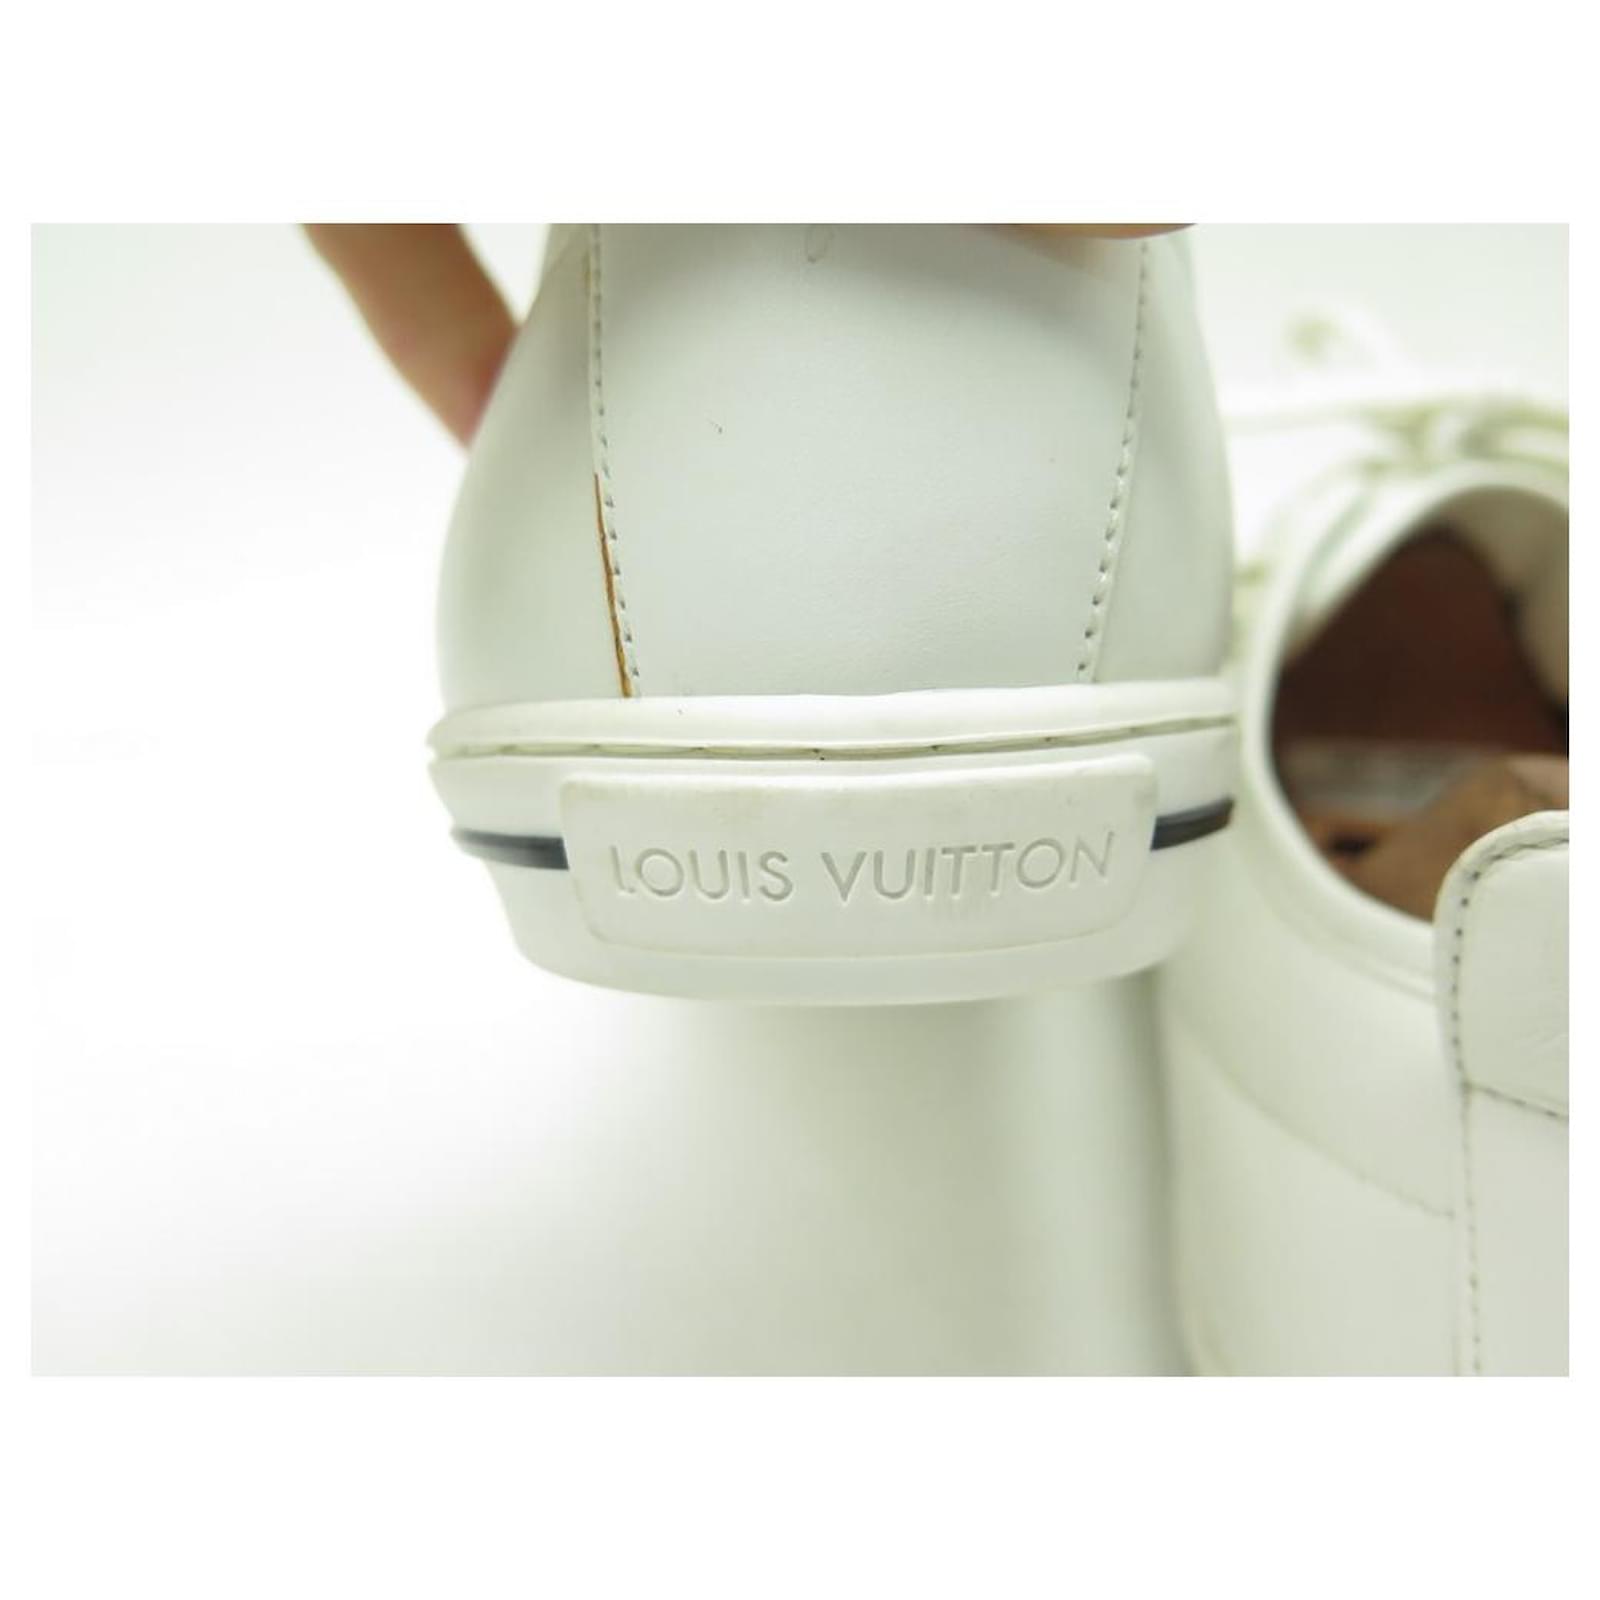 LOUIS VUITTON sneakers SHOES 9 43 IN WHITE LEATHER + BOX SNEAKERS SHOES